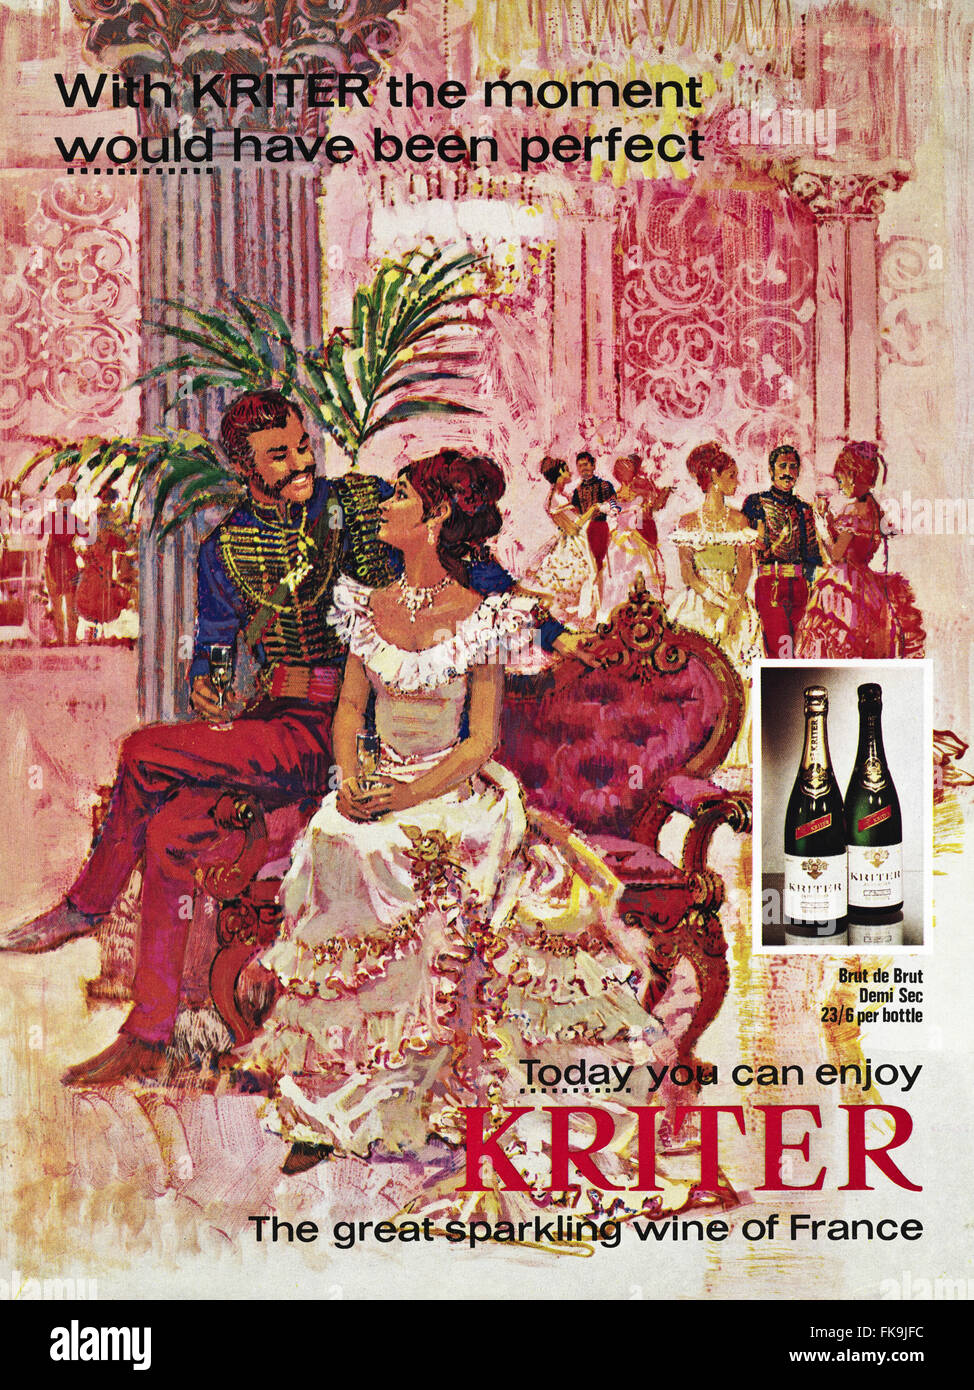 Original vintage full page colour advert from 1960s. Advertisement dated 1969 advertising KRITER sparkling wine from France. Stock Photo